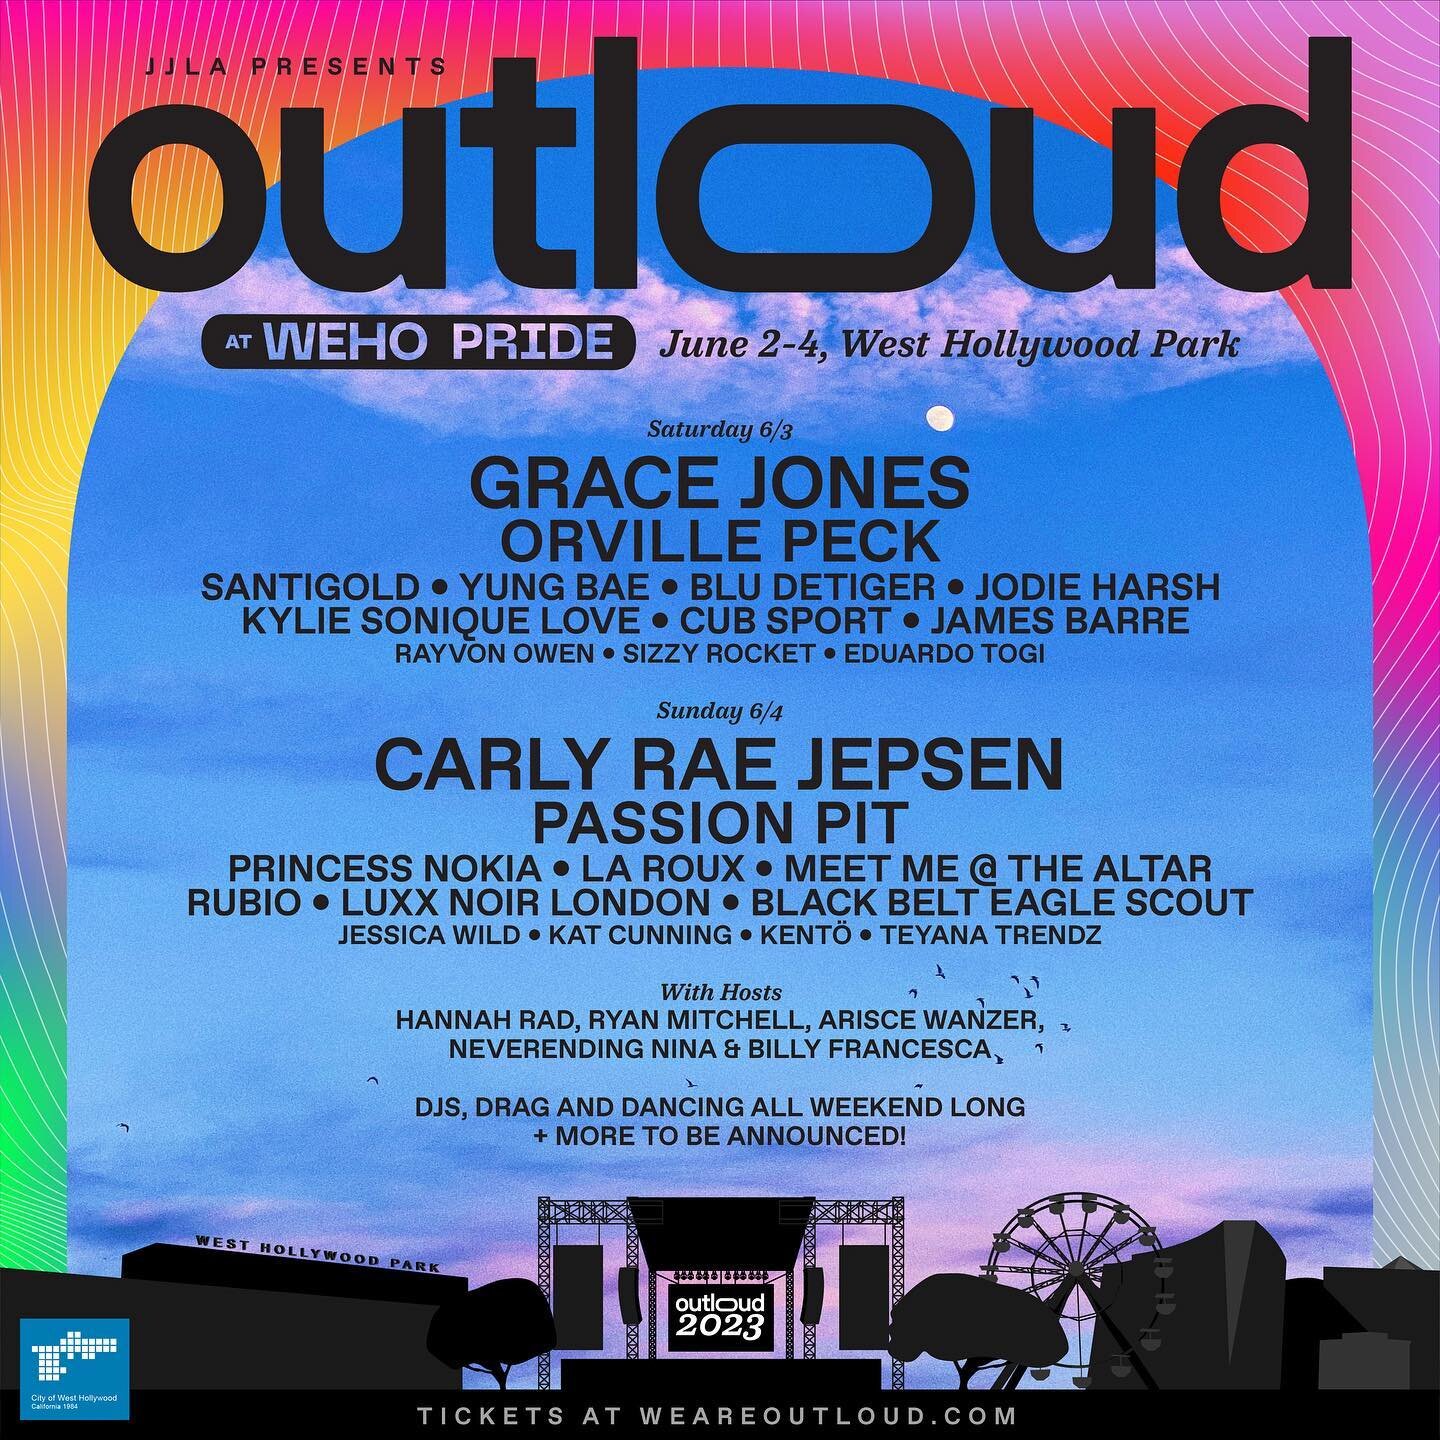 All the #rumours are true! @officiallyoutloud at WeHo Pride (@wehopride) I am coming for you! So excited to share the #mainstage with some truly amazing artists! Visit weareoutloud.com for more information.

@meetjjla @jeffcons @djsamhiller @ricardox